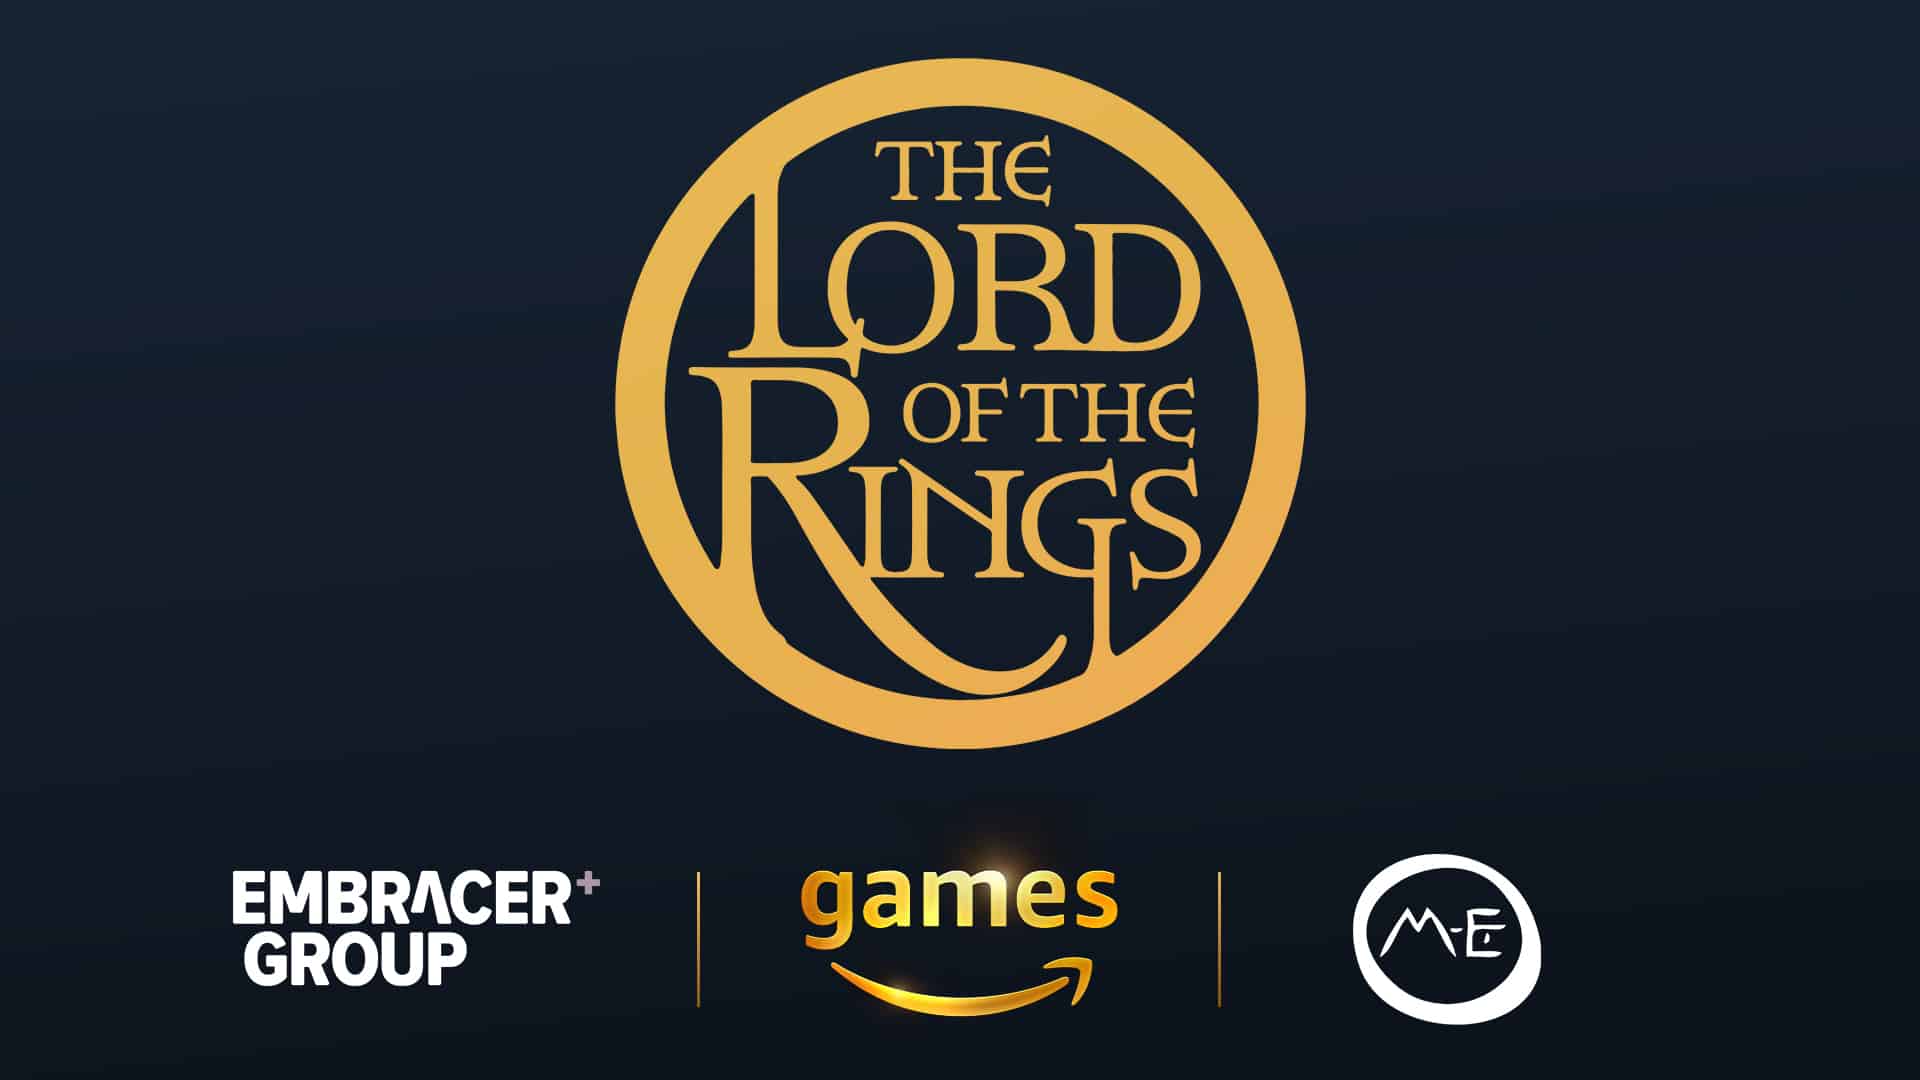 Amazon Games Teaming Up With Embracer Group for Lord of the Rings MMO